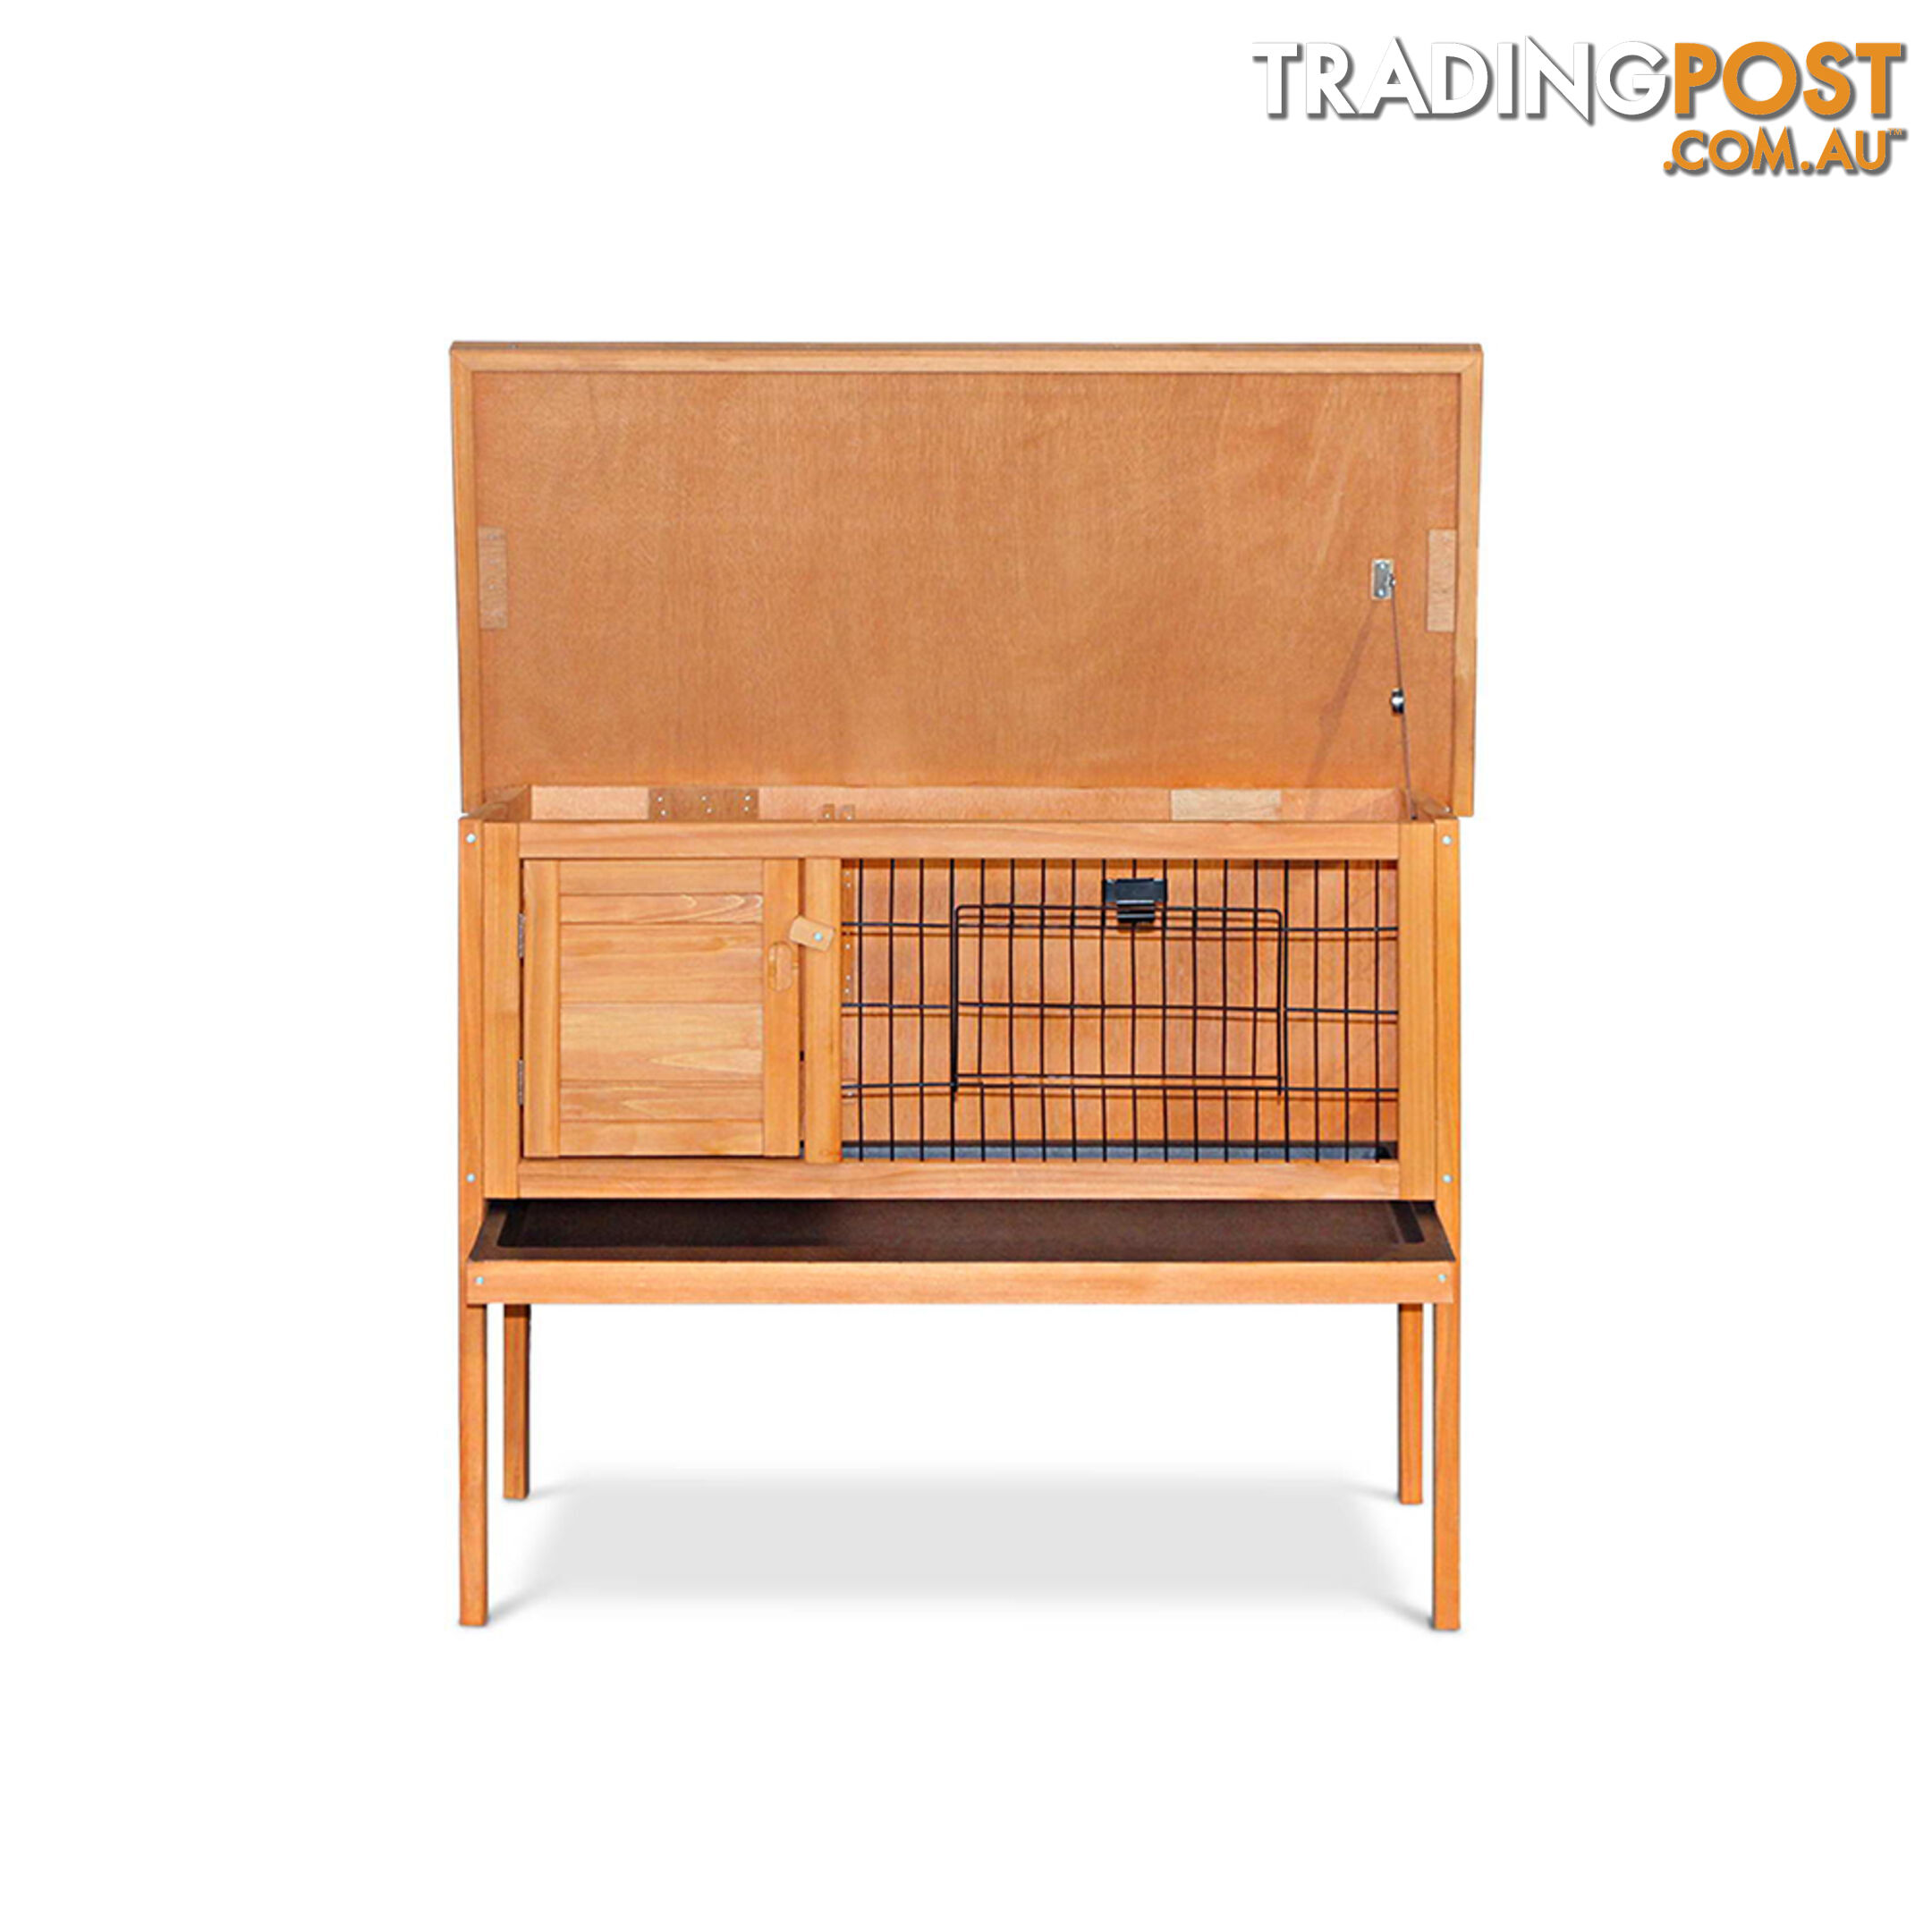 Rabbit Hutch with Hinged Lid